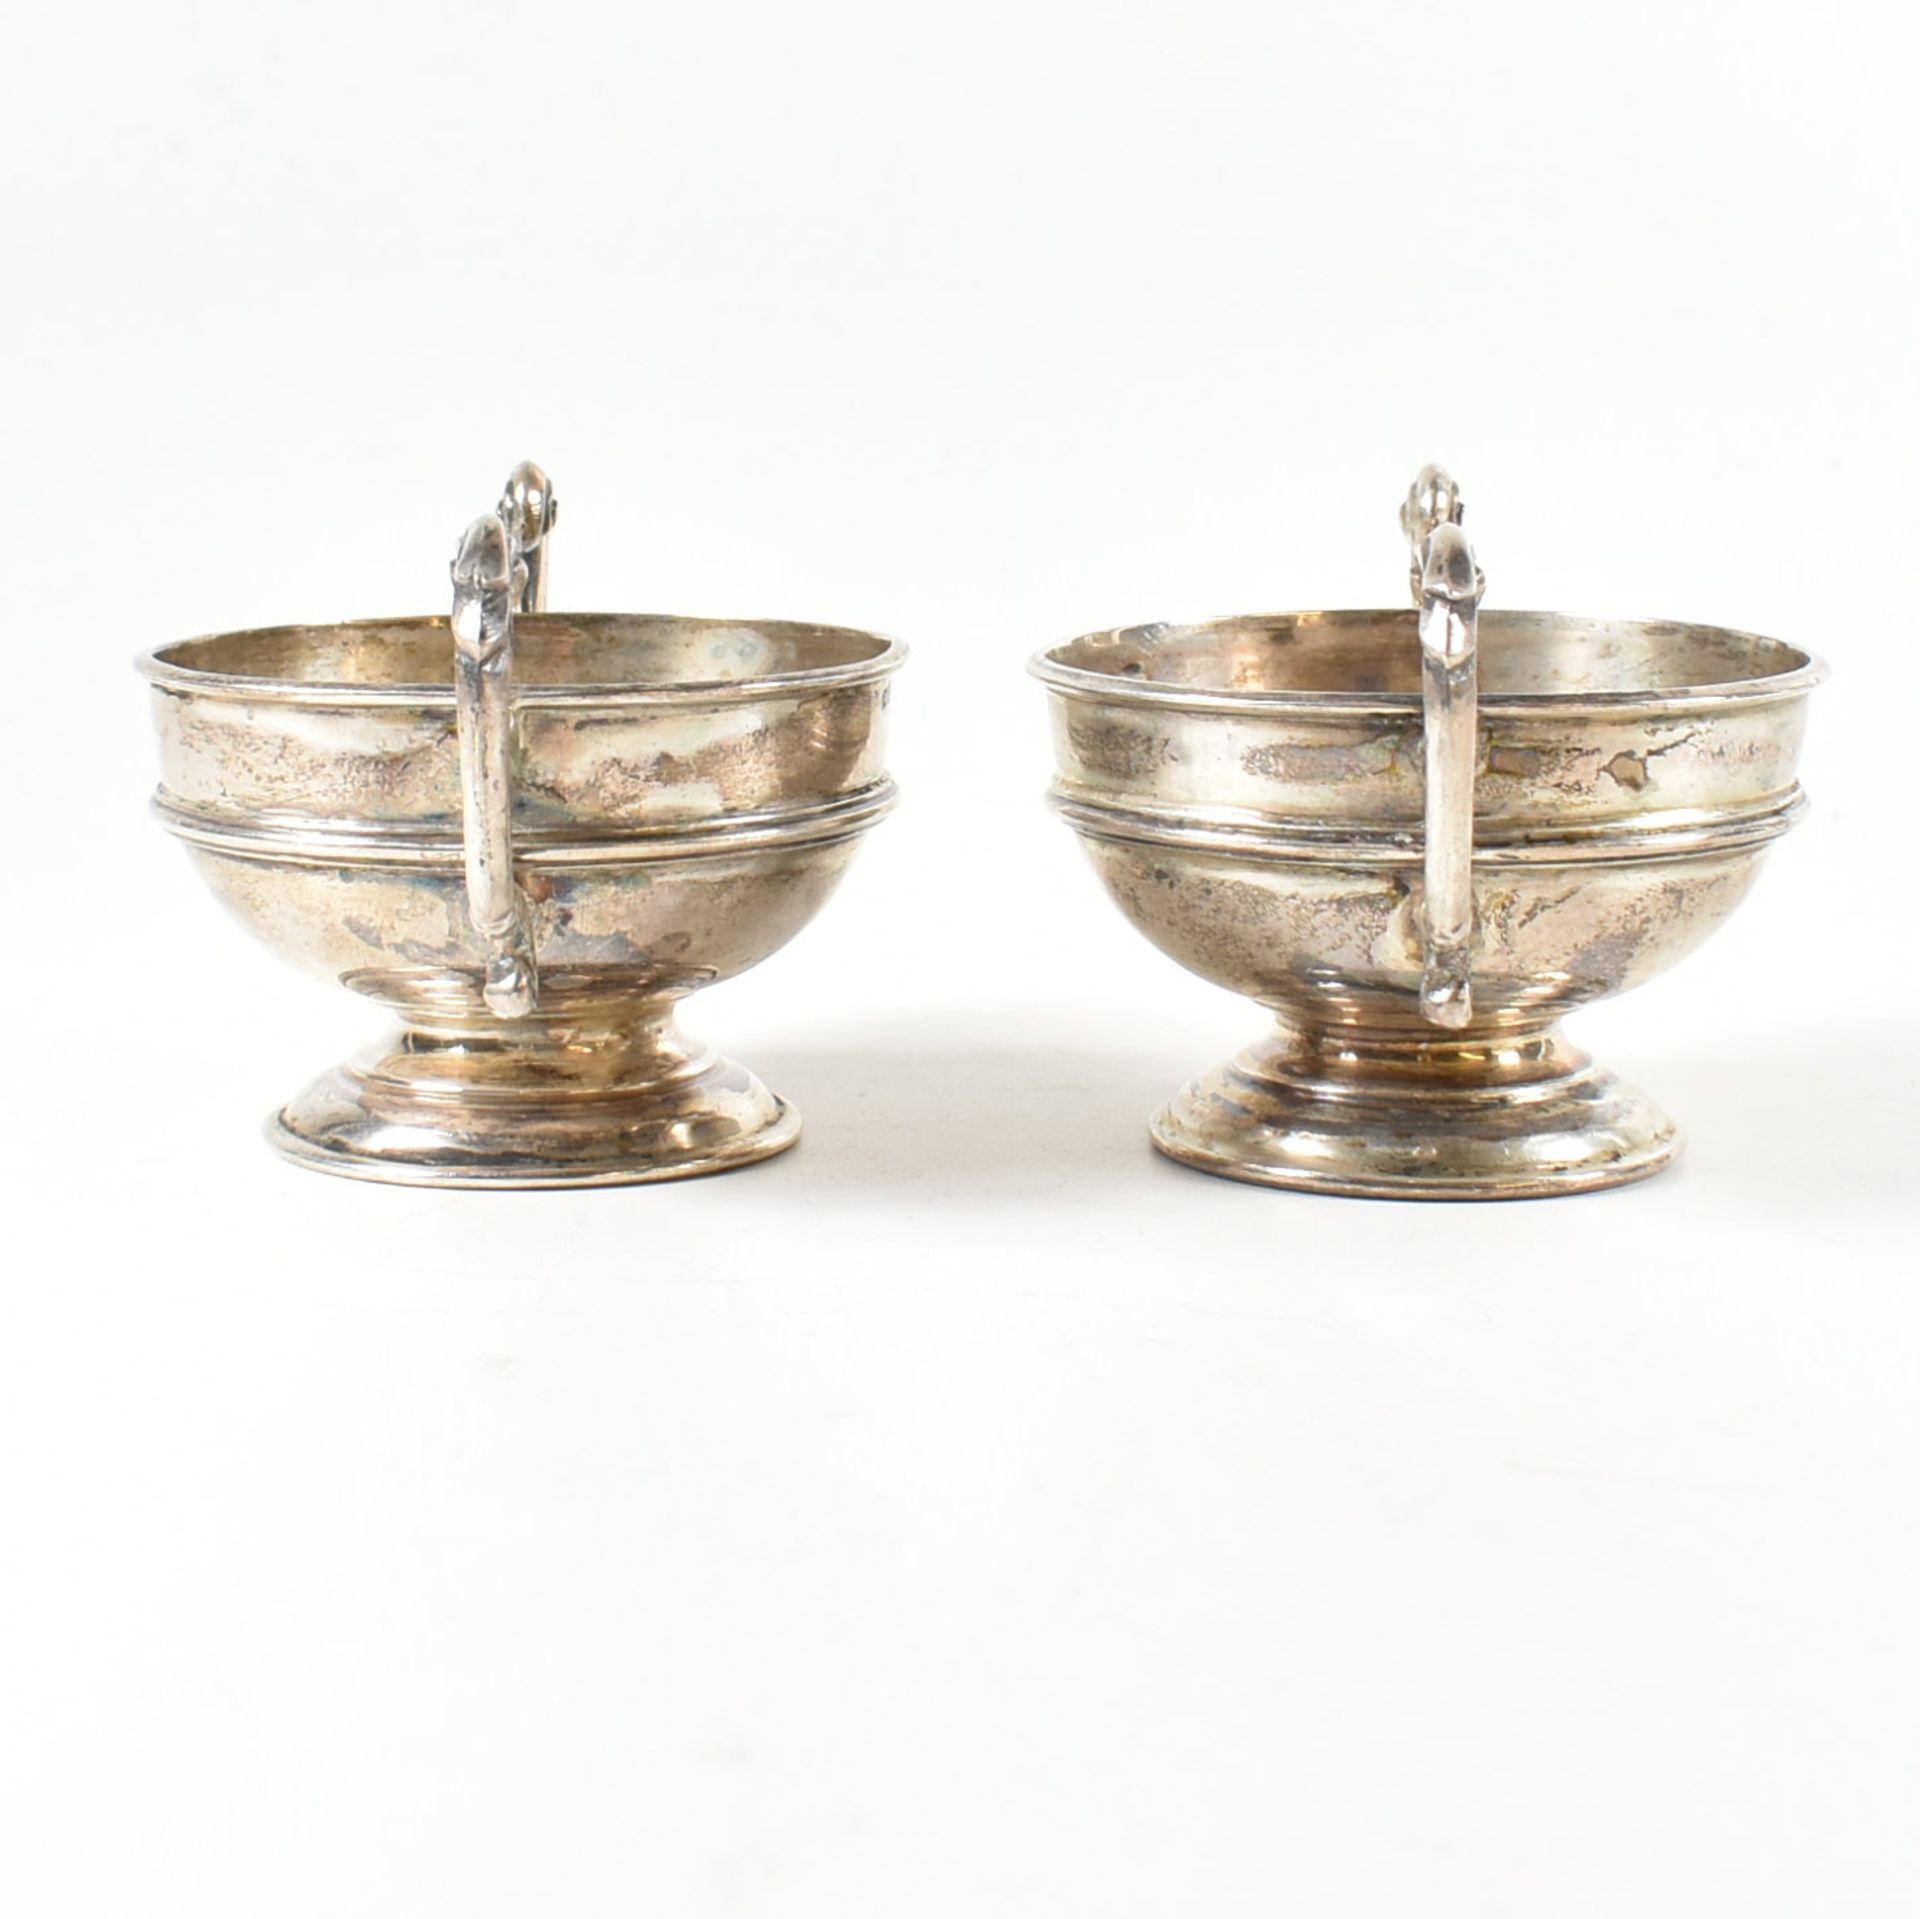 PAIR OF LATE VICTORIAN HALLMARKED SILVER SALTS CHARLES HORNER - Image 3 of 9